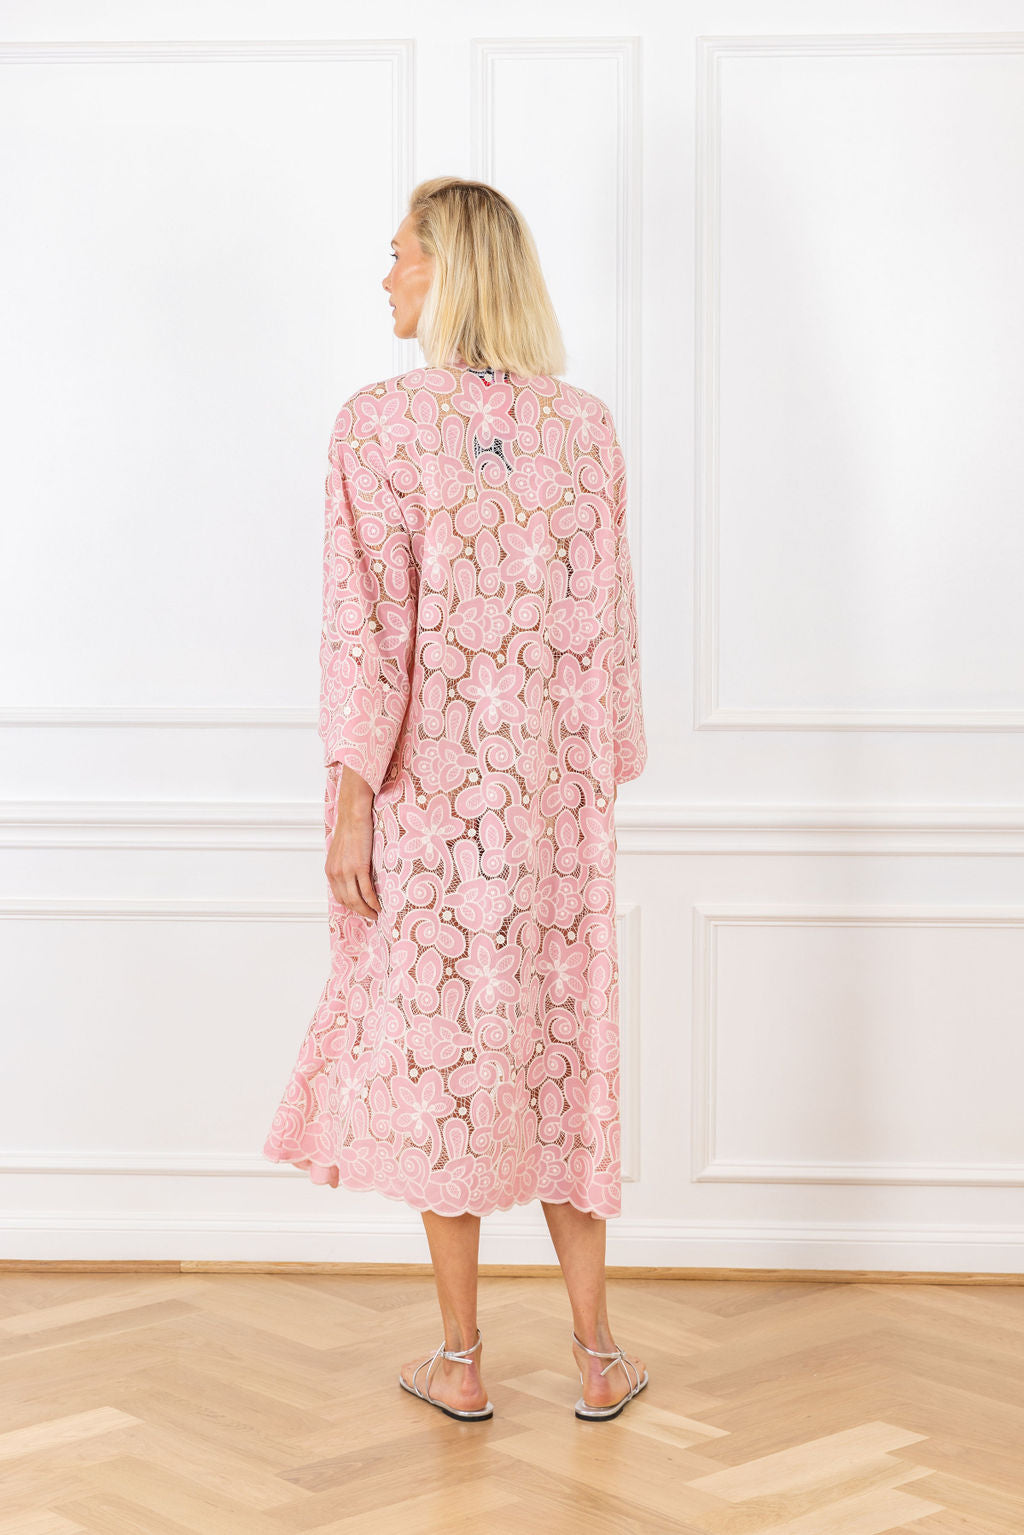 Veiled Rose Lace Open Front Caftan